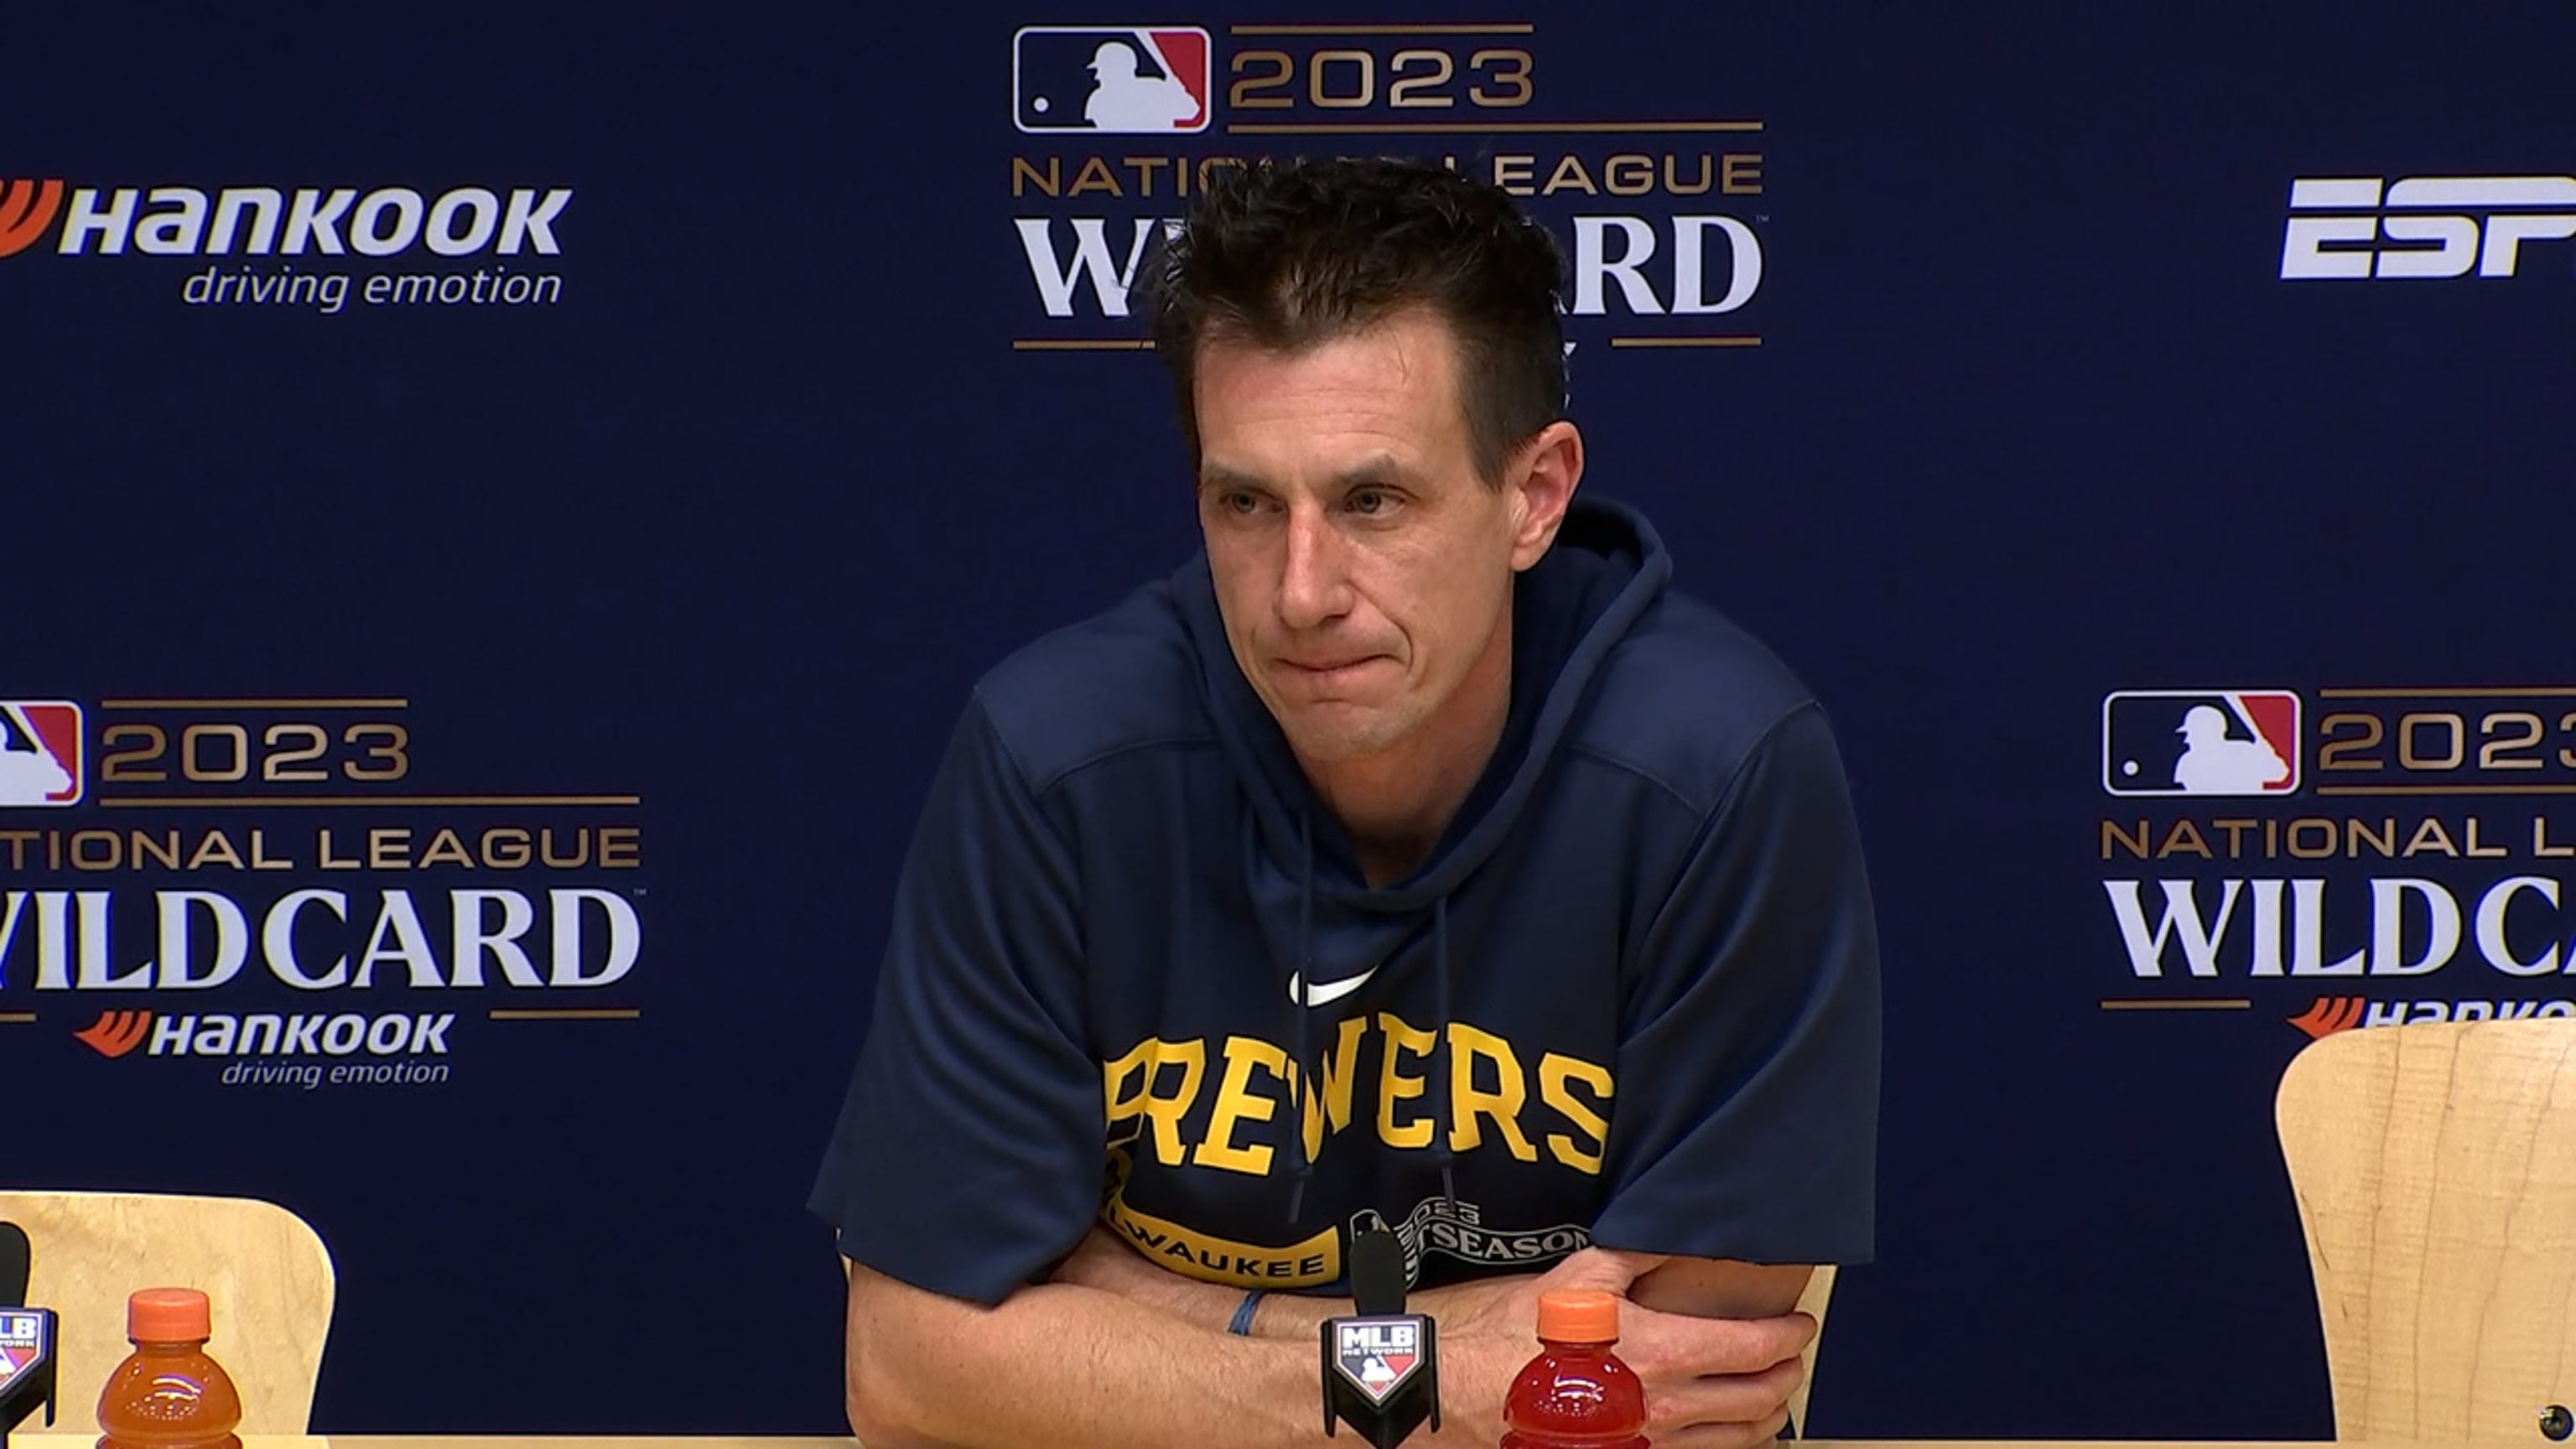 Brewers officially announce Craig Counsell as manager - Brew Crew Ball